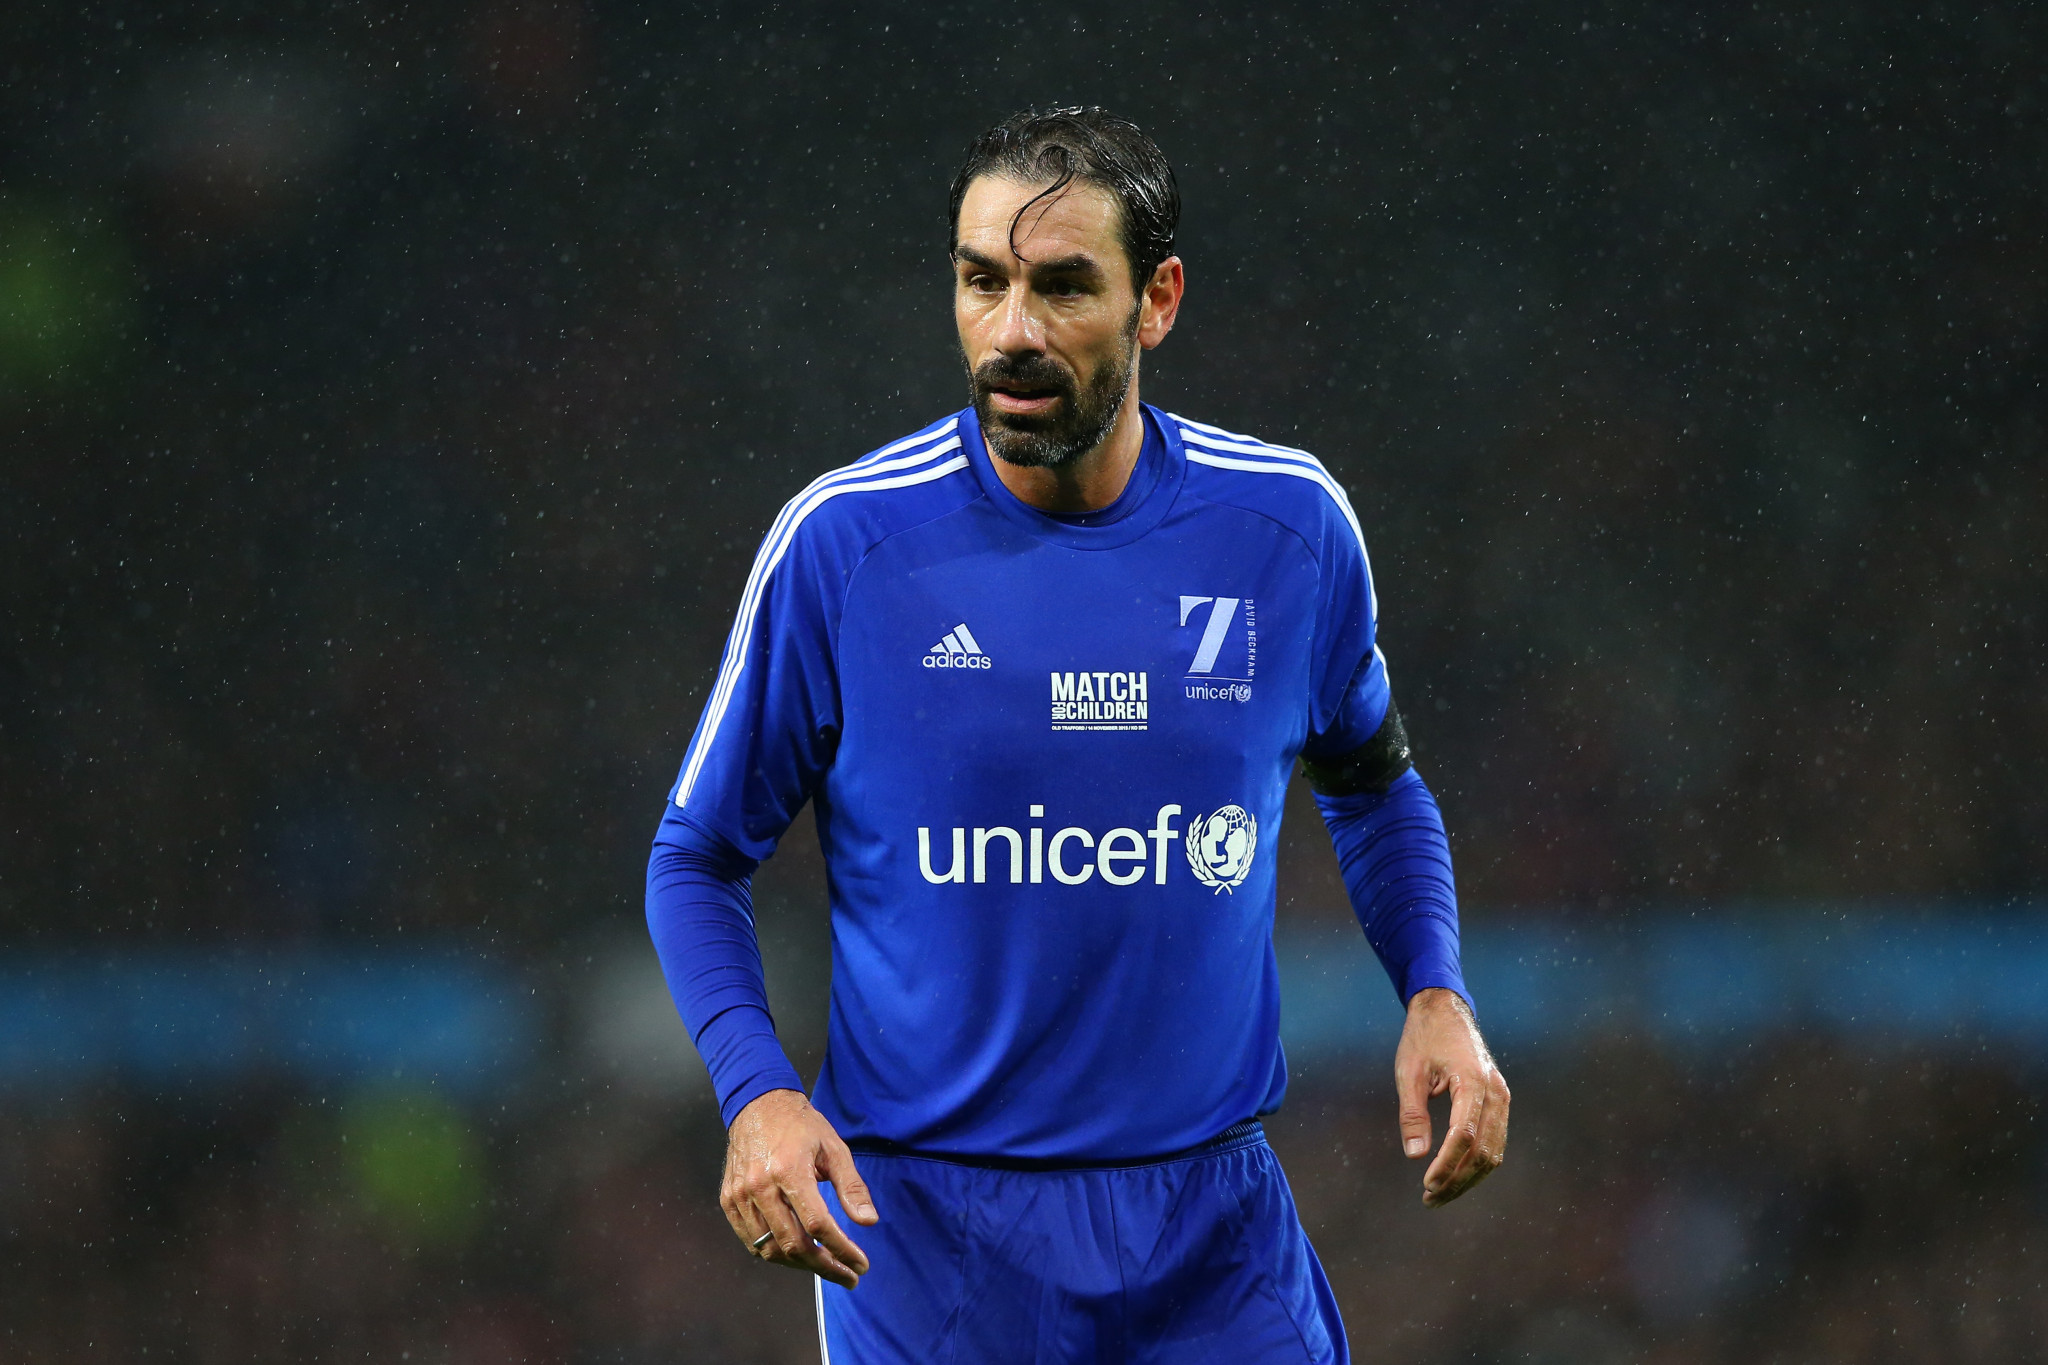 Robert Pires won the FIFA World Cup and UEFA European Championships with France in 1998 and 2000 respectively ©Getty Images